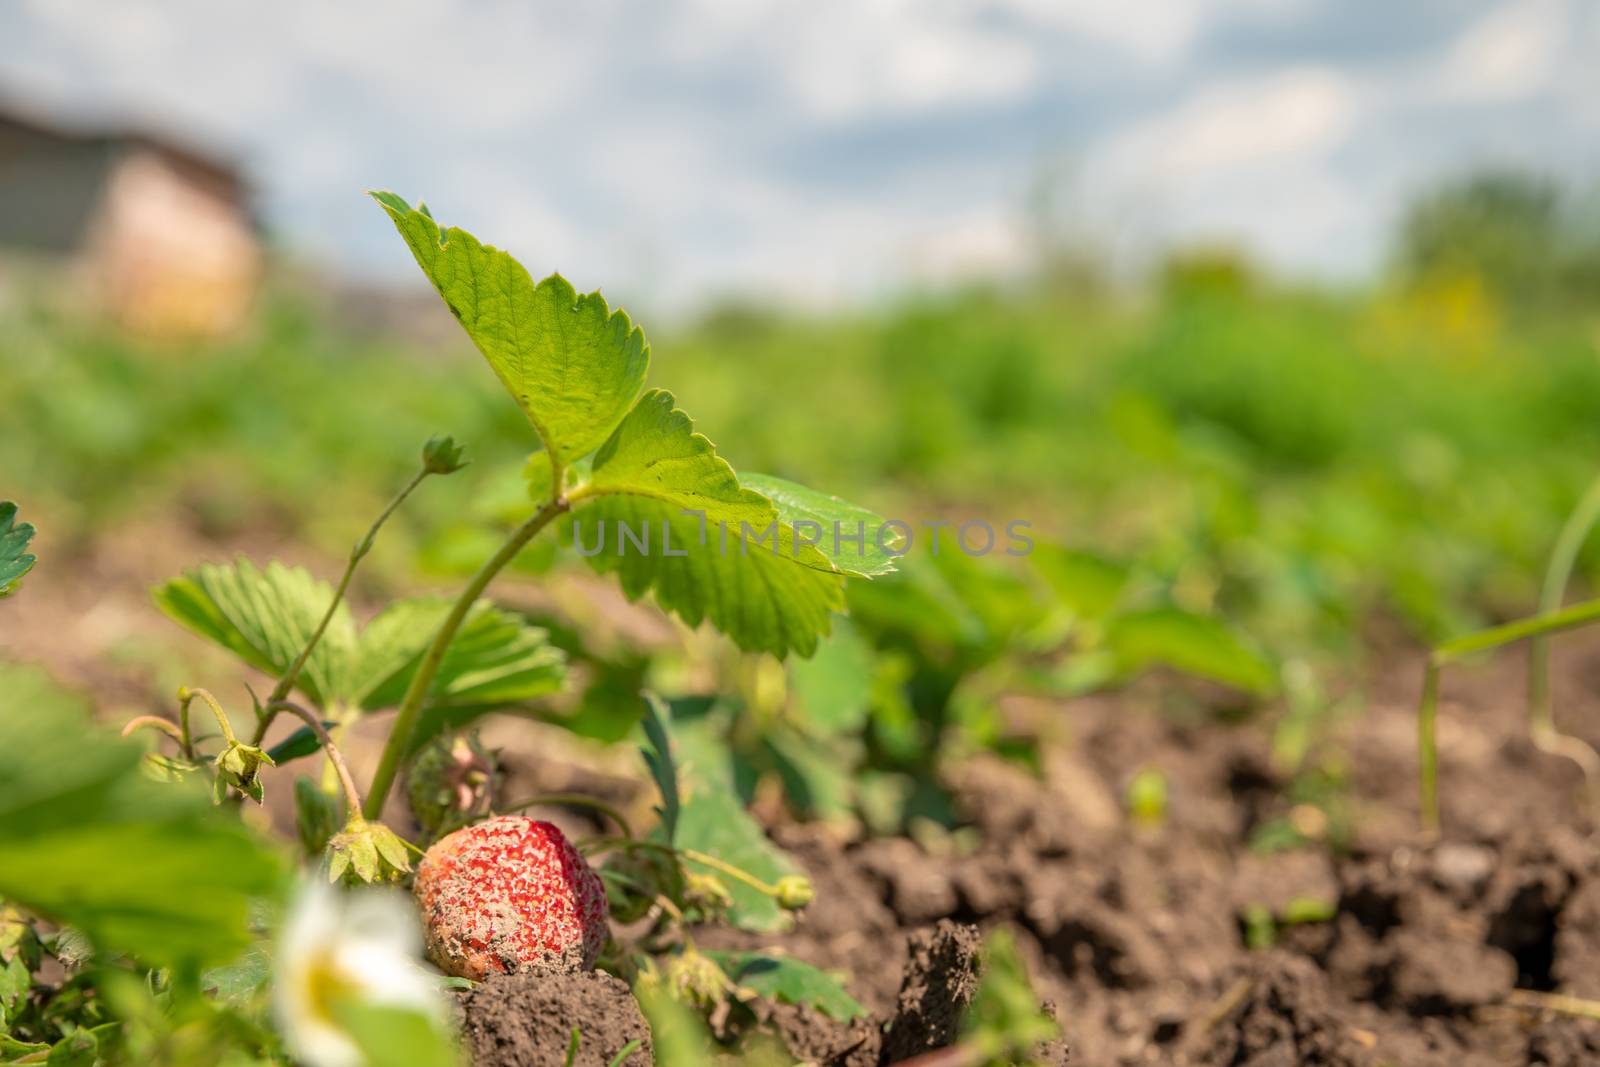 growing strawberries without chemistry on an organic farm.